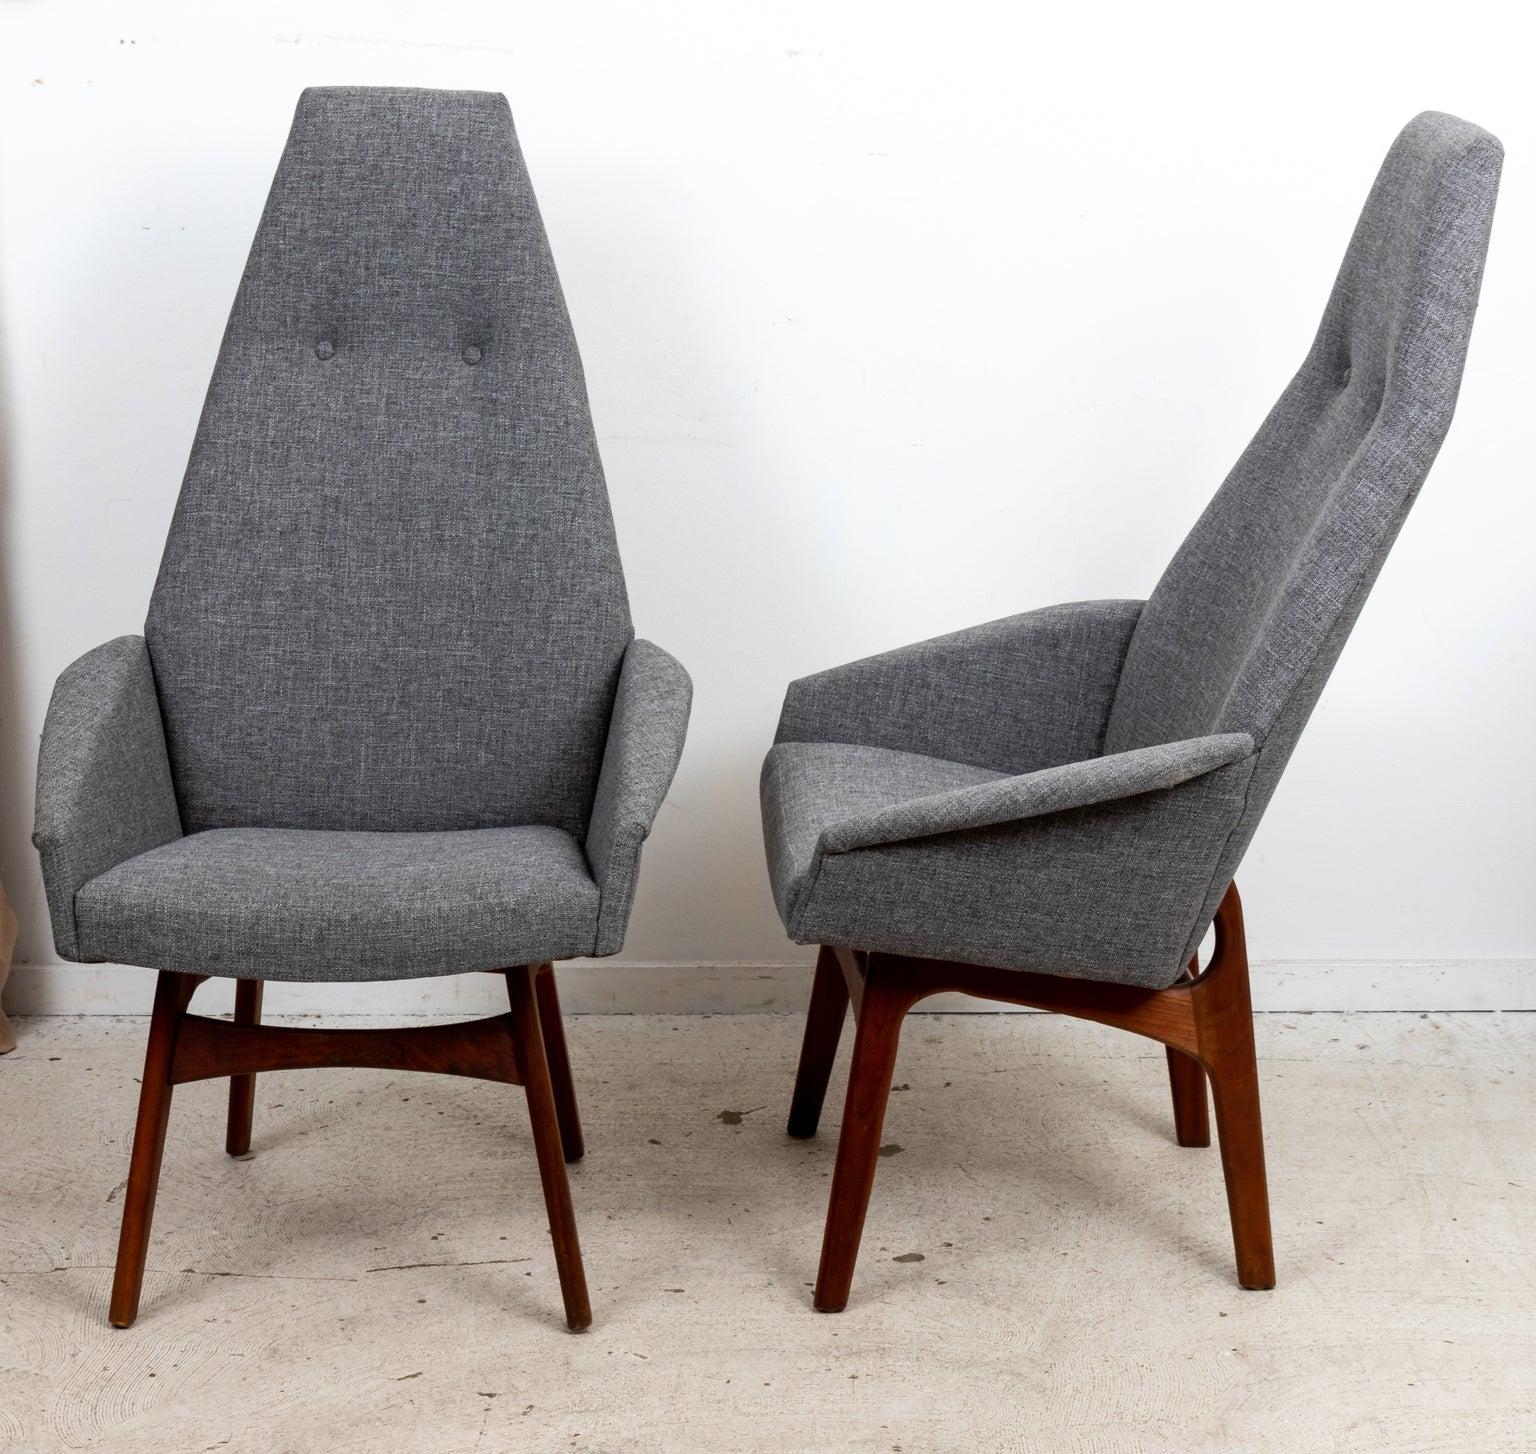 Circa mid-20th century pair of high back chairs in the Mid-Century Modern style by Wilkes-Barre, PA based designer Adrian Pearsall. The chairs feature high seat backs with tufted buttons and turned Walnut legs. Made in the United States. Please note